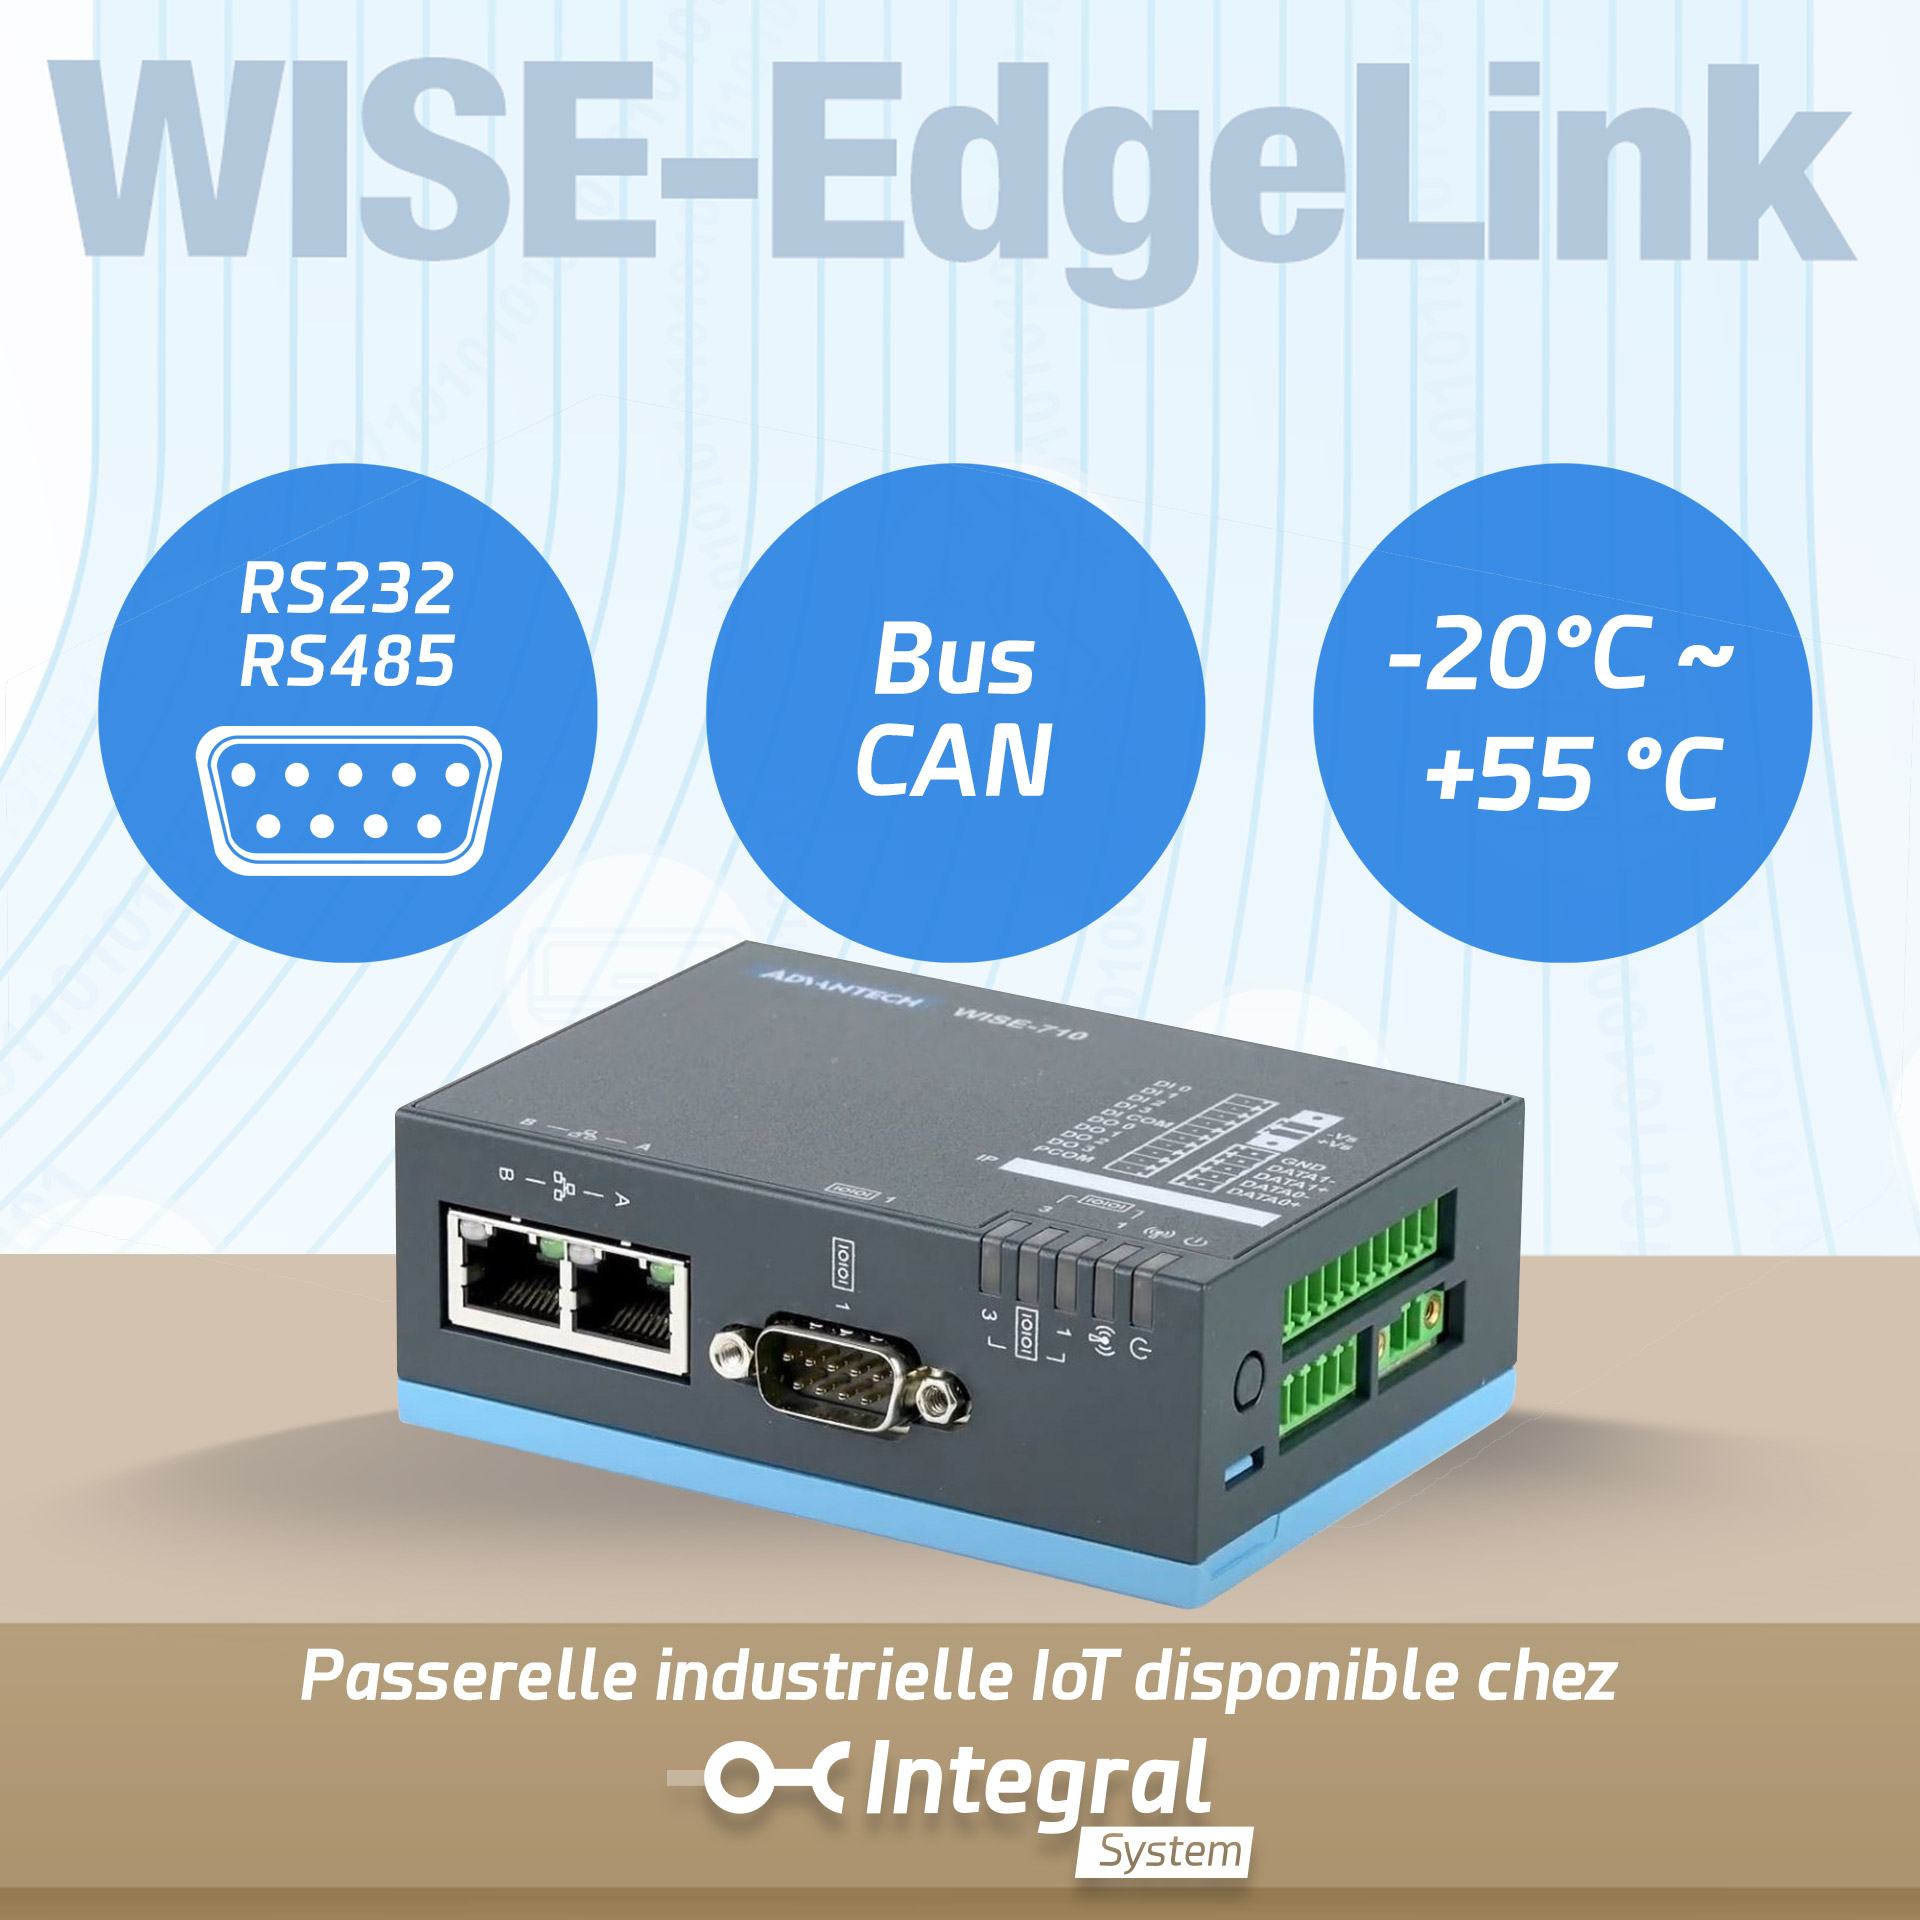 WISE-710-EdgeLink-RS